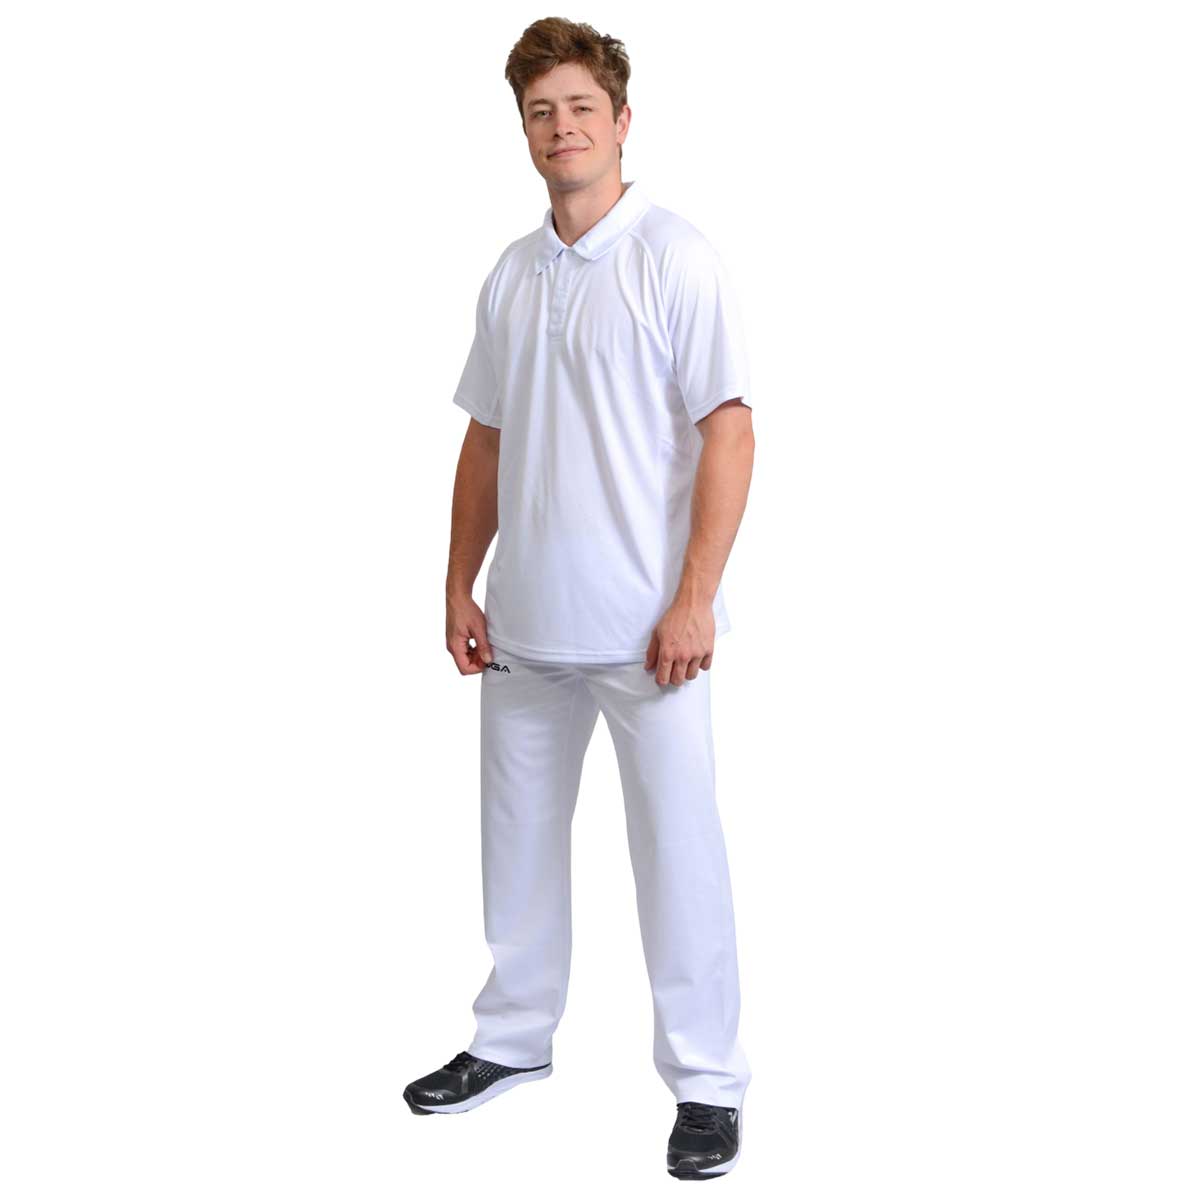 Cut and Sew Cricket Pants Manufacturers in Bangladesh